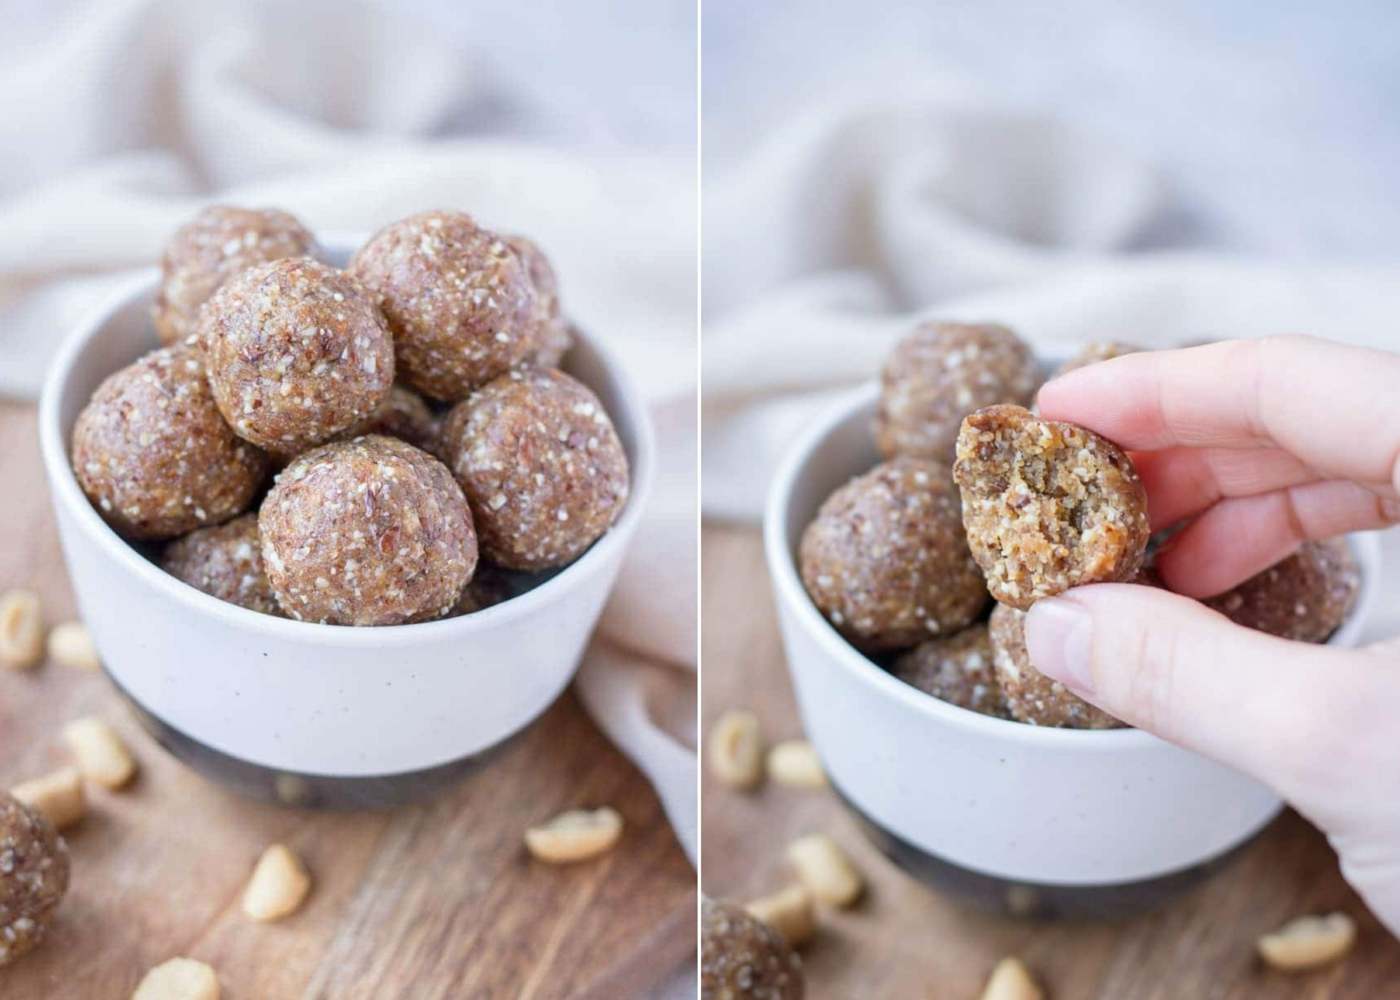 Shellfish recipe for peanut butter balls with dates and linseed without baking